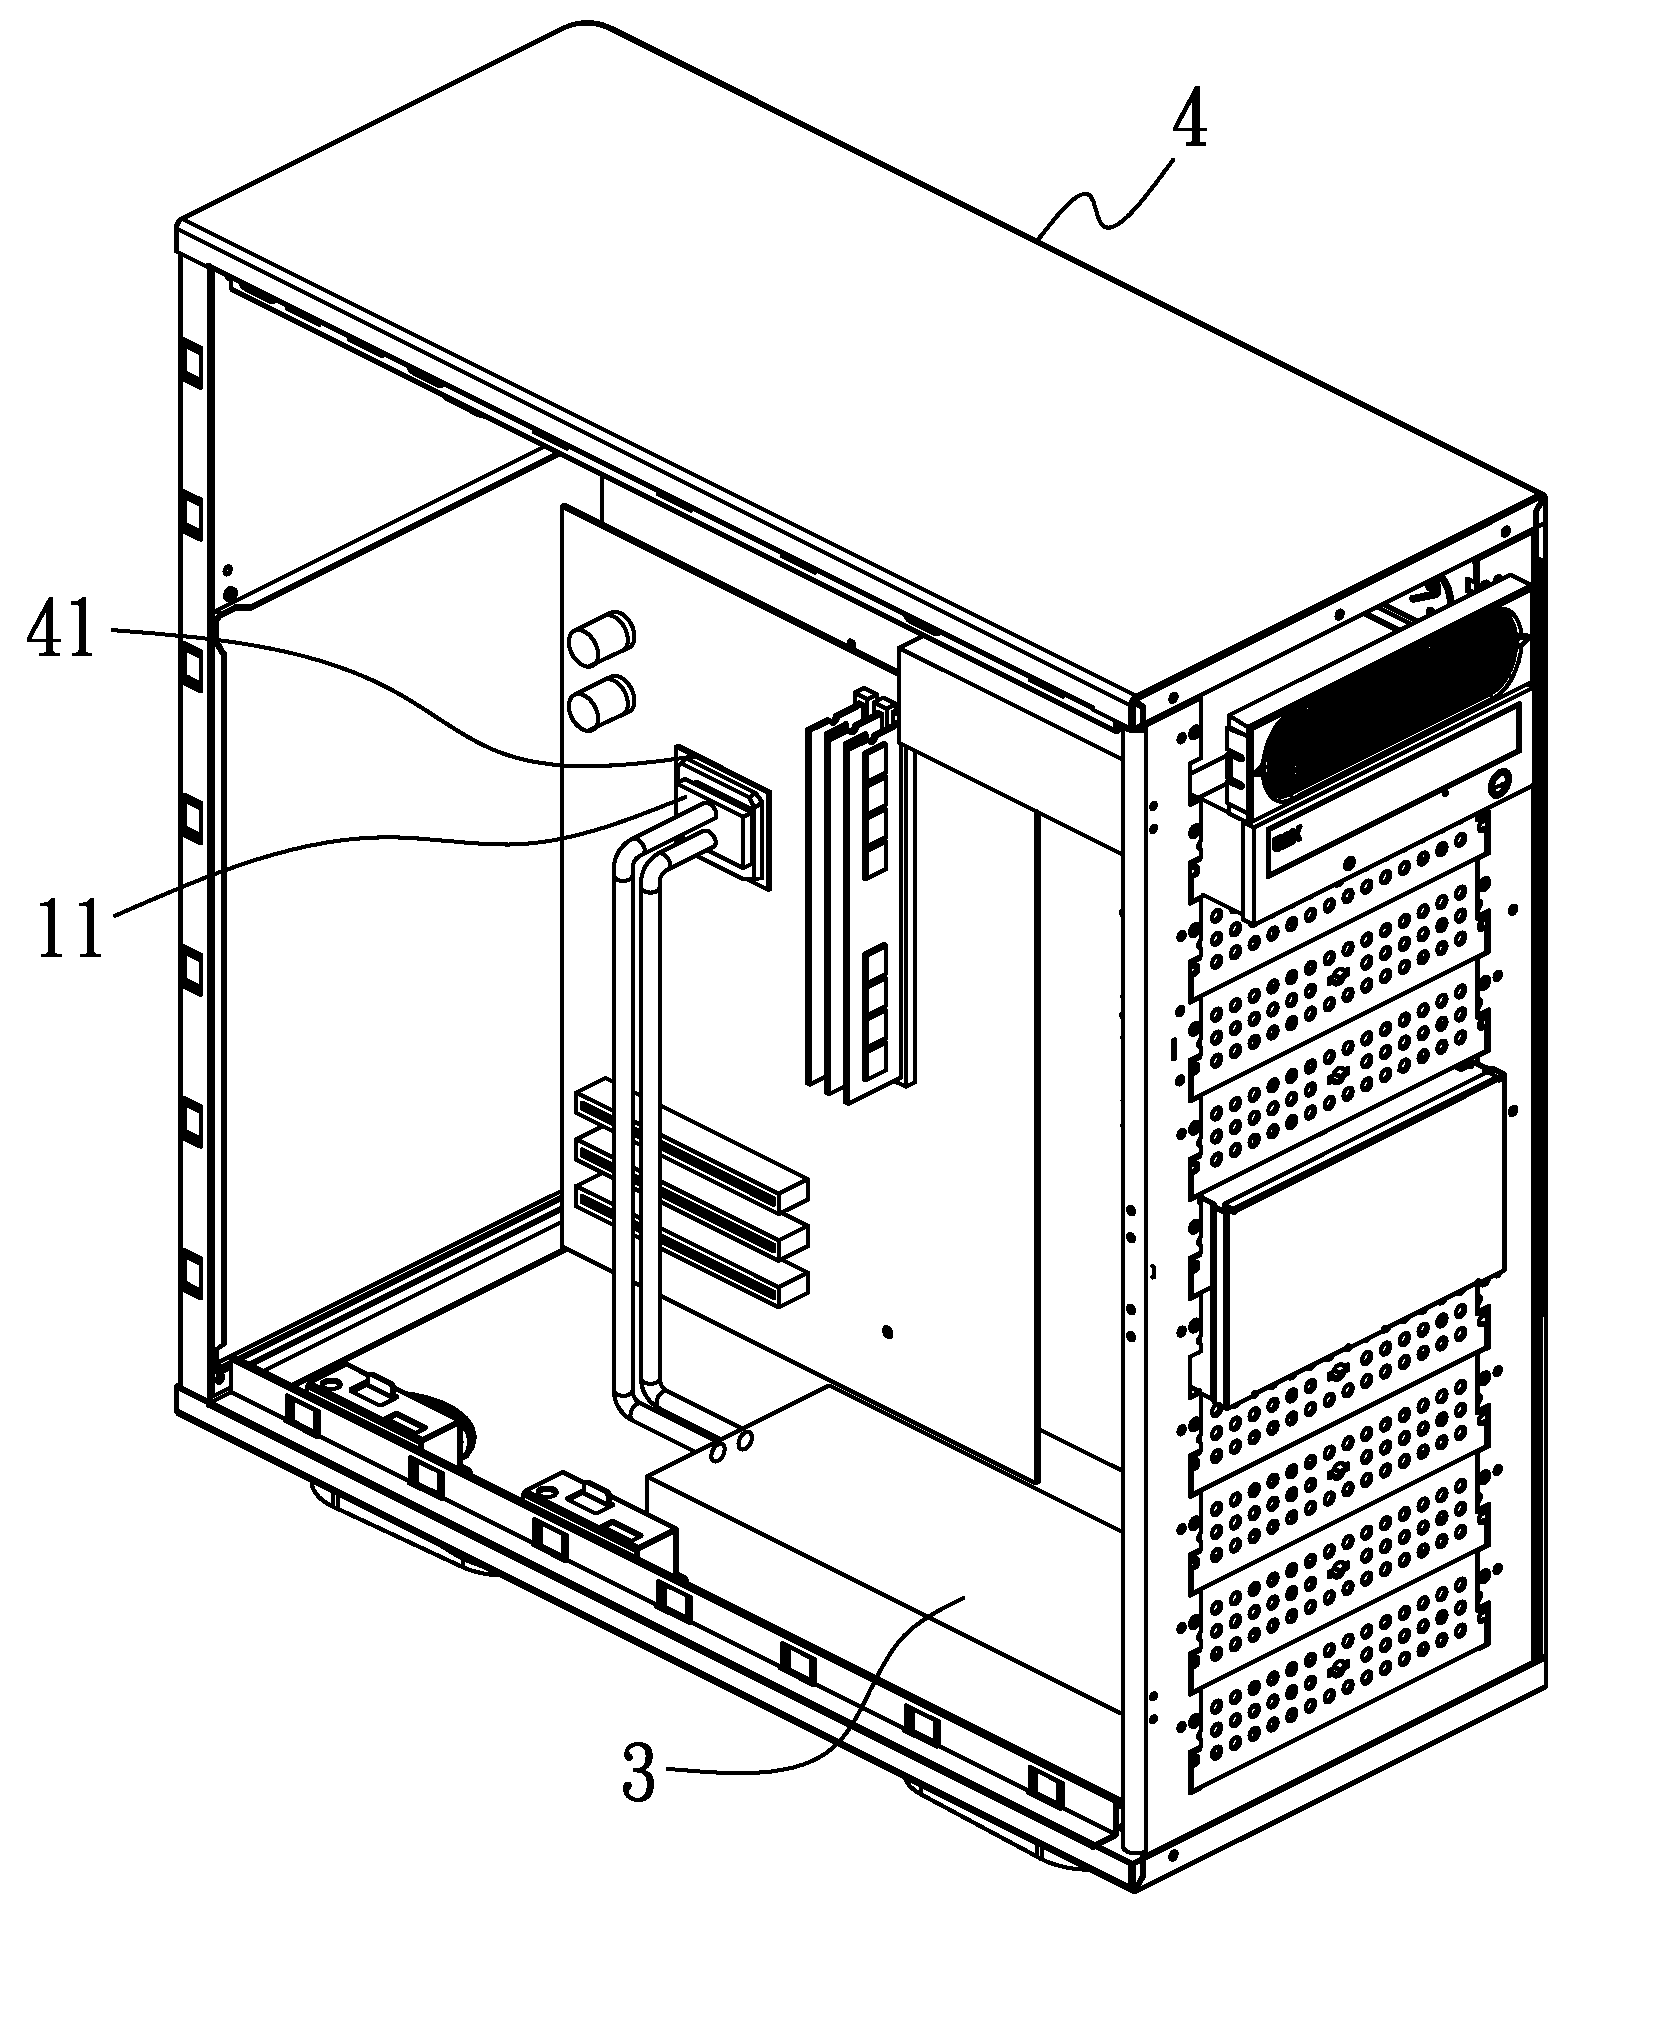 Computer cooling apparatus